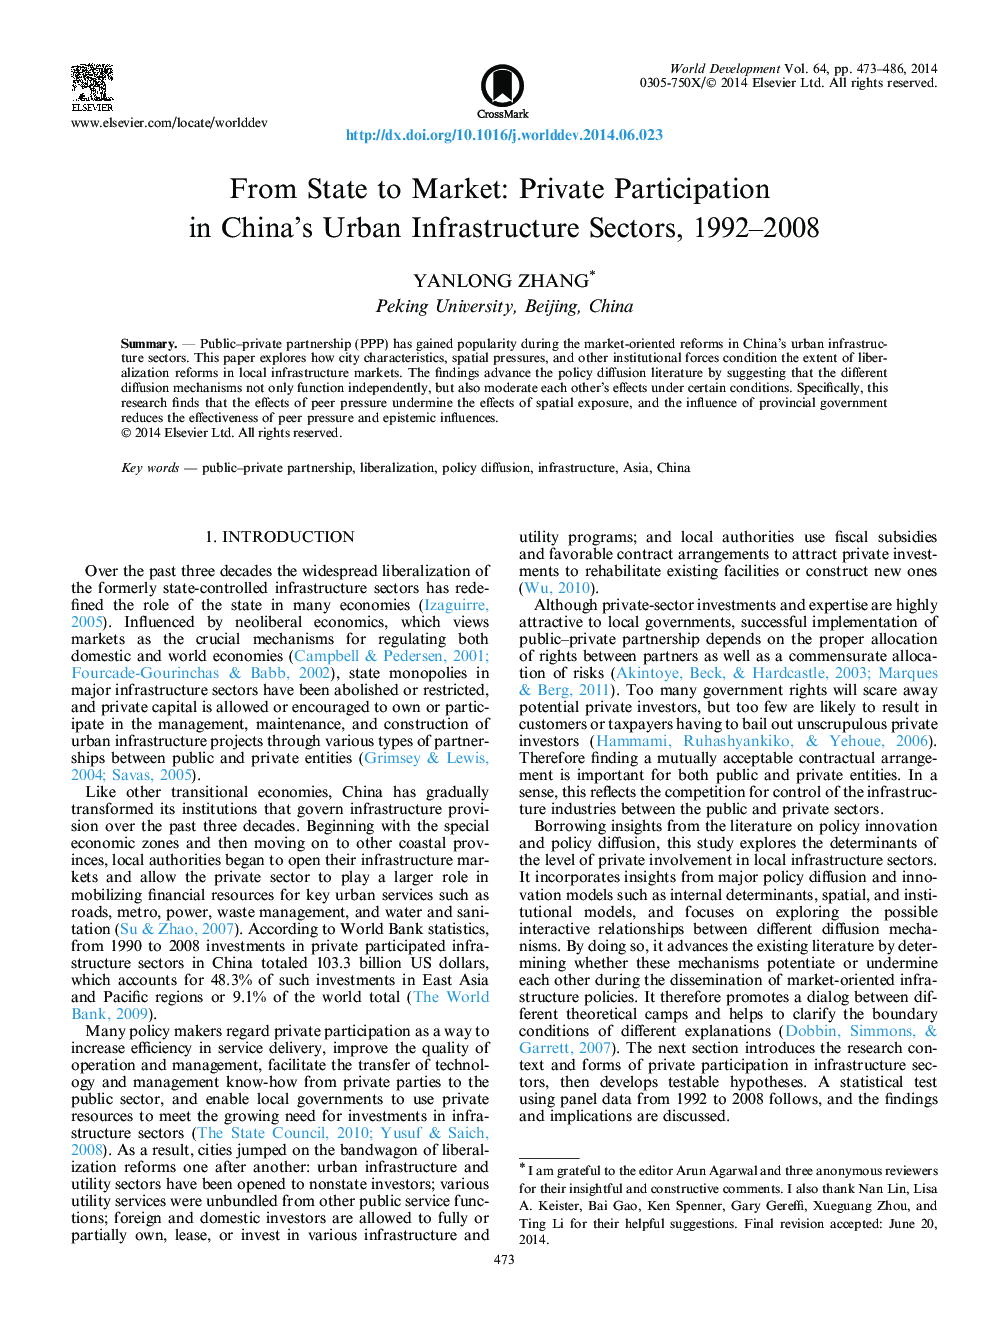 From State to Market: Private Participation in China's Urban Infrastructure Sectors, 1992-2008